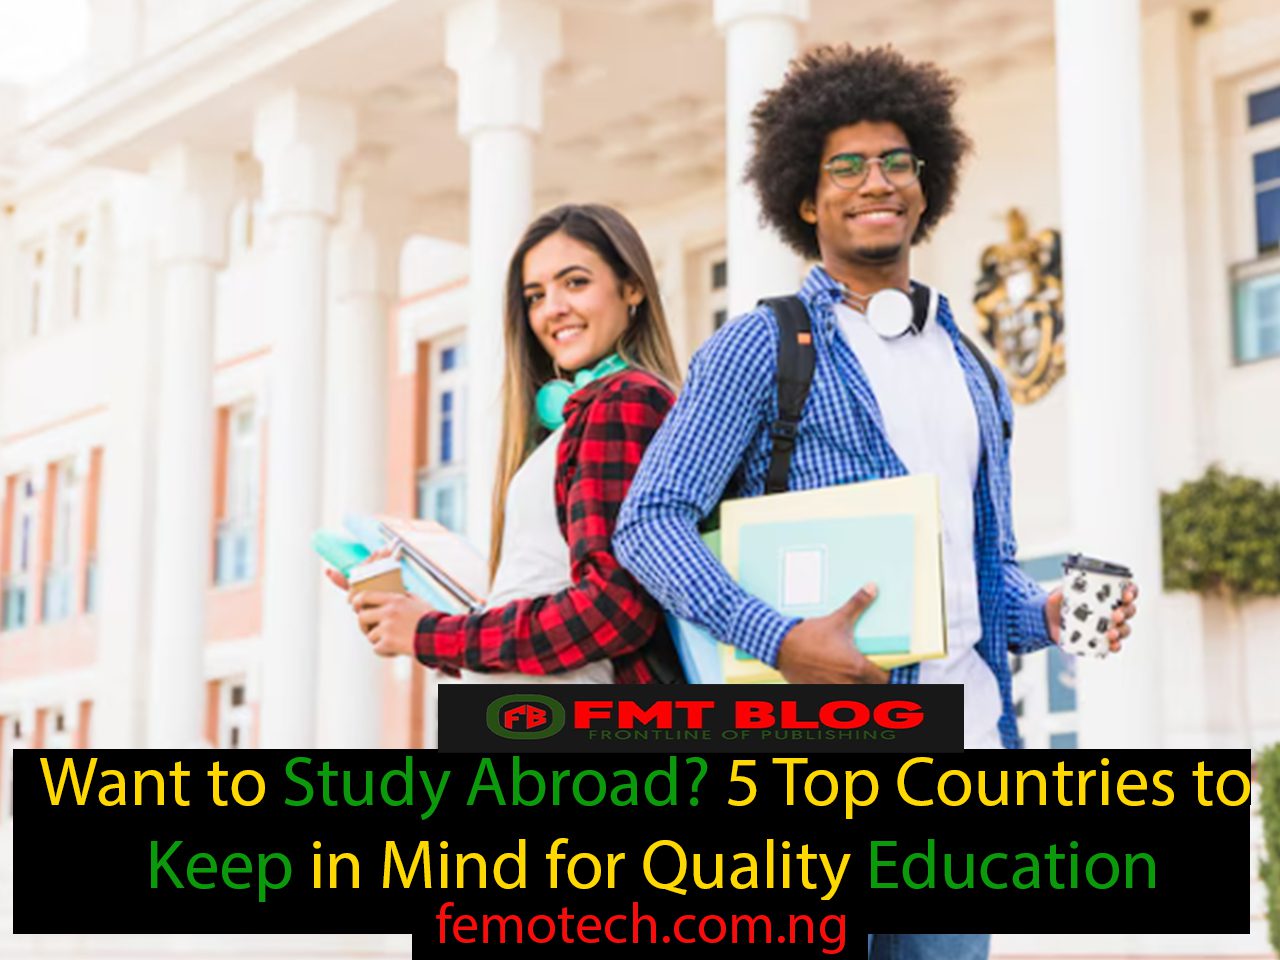 Want to Study Abroad? 5 Top Countries to Keep in Mind for Quality Education